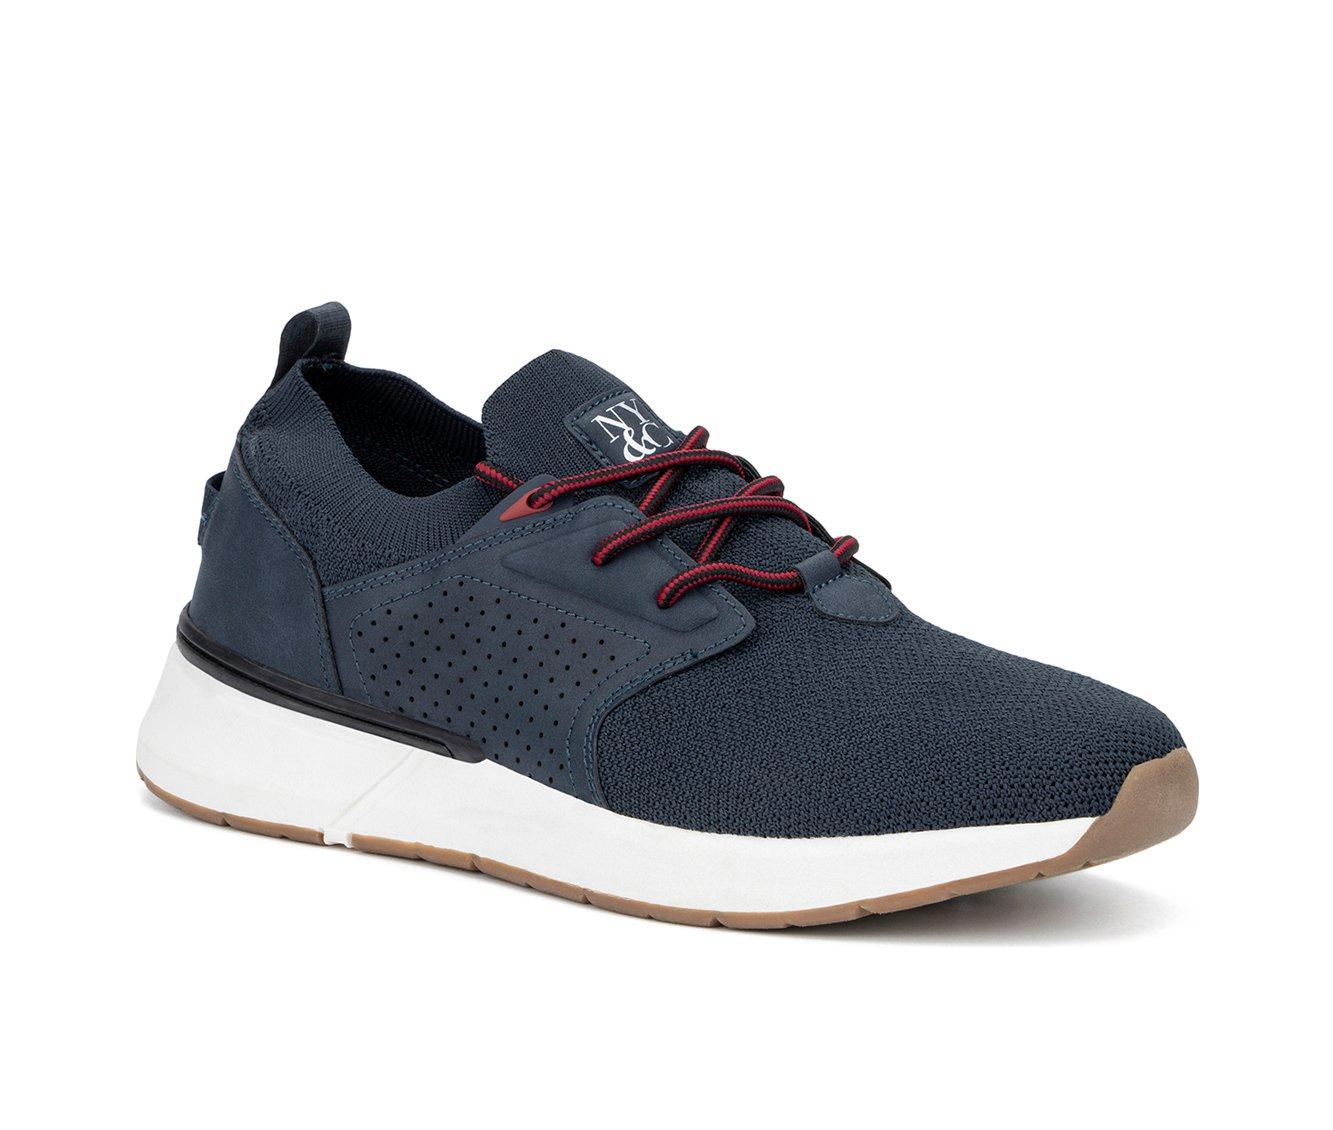 Men's New York and Company Bunker Sneakers